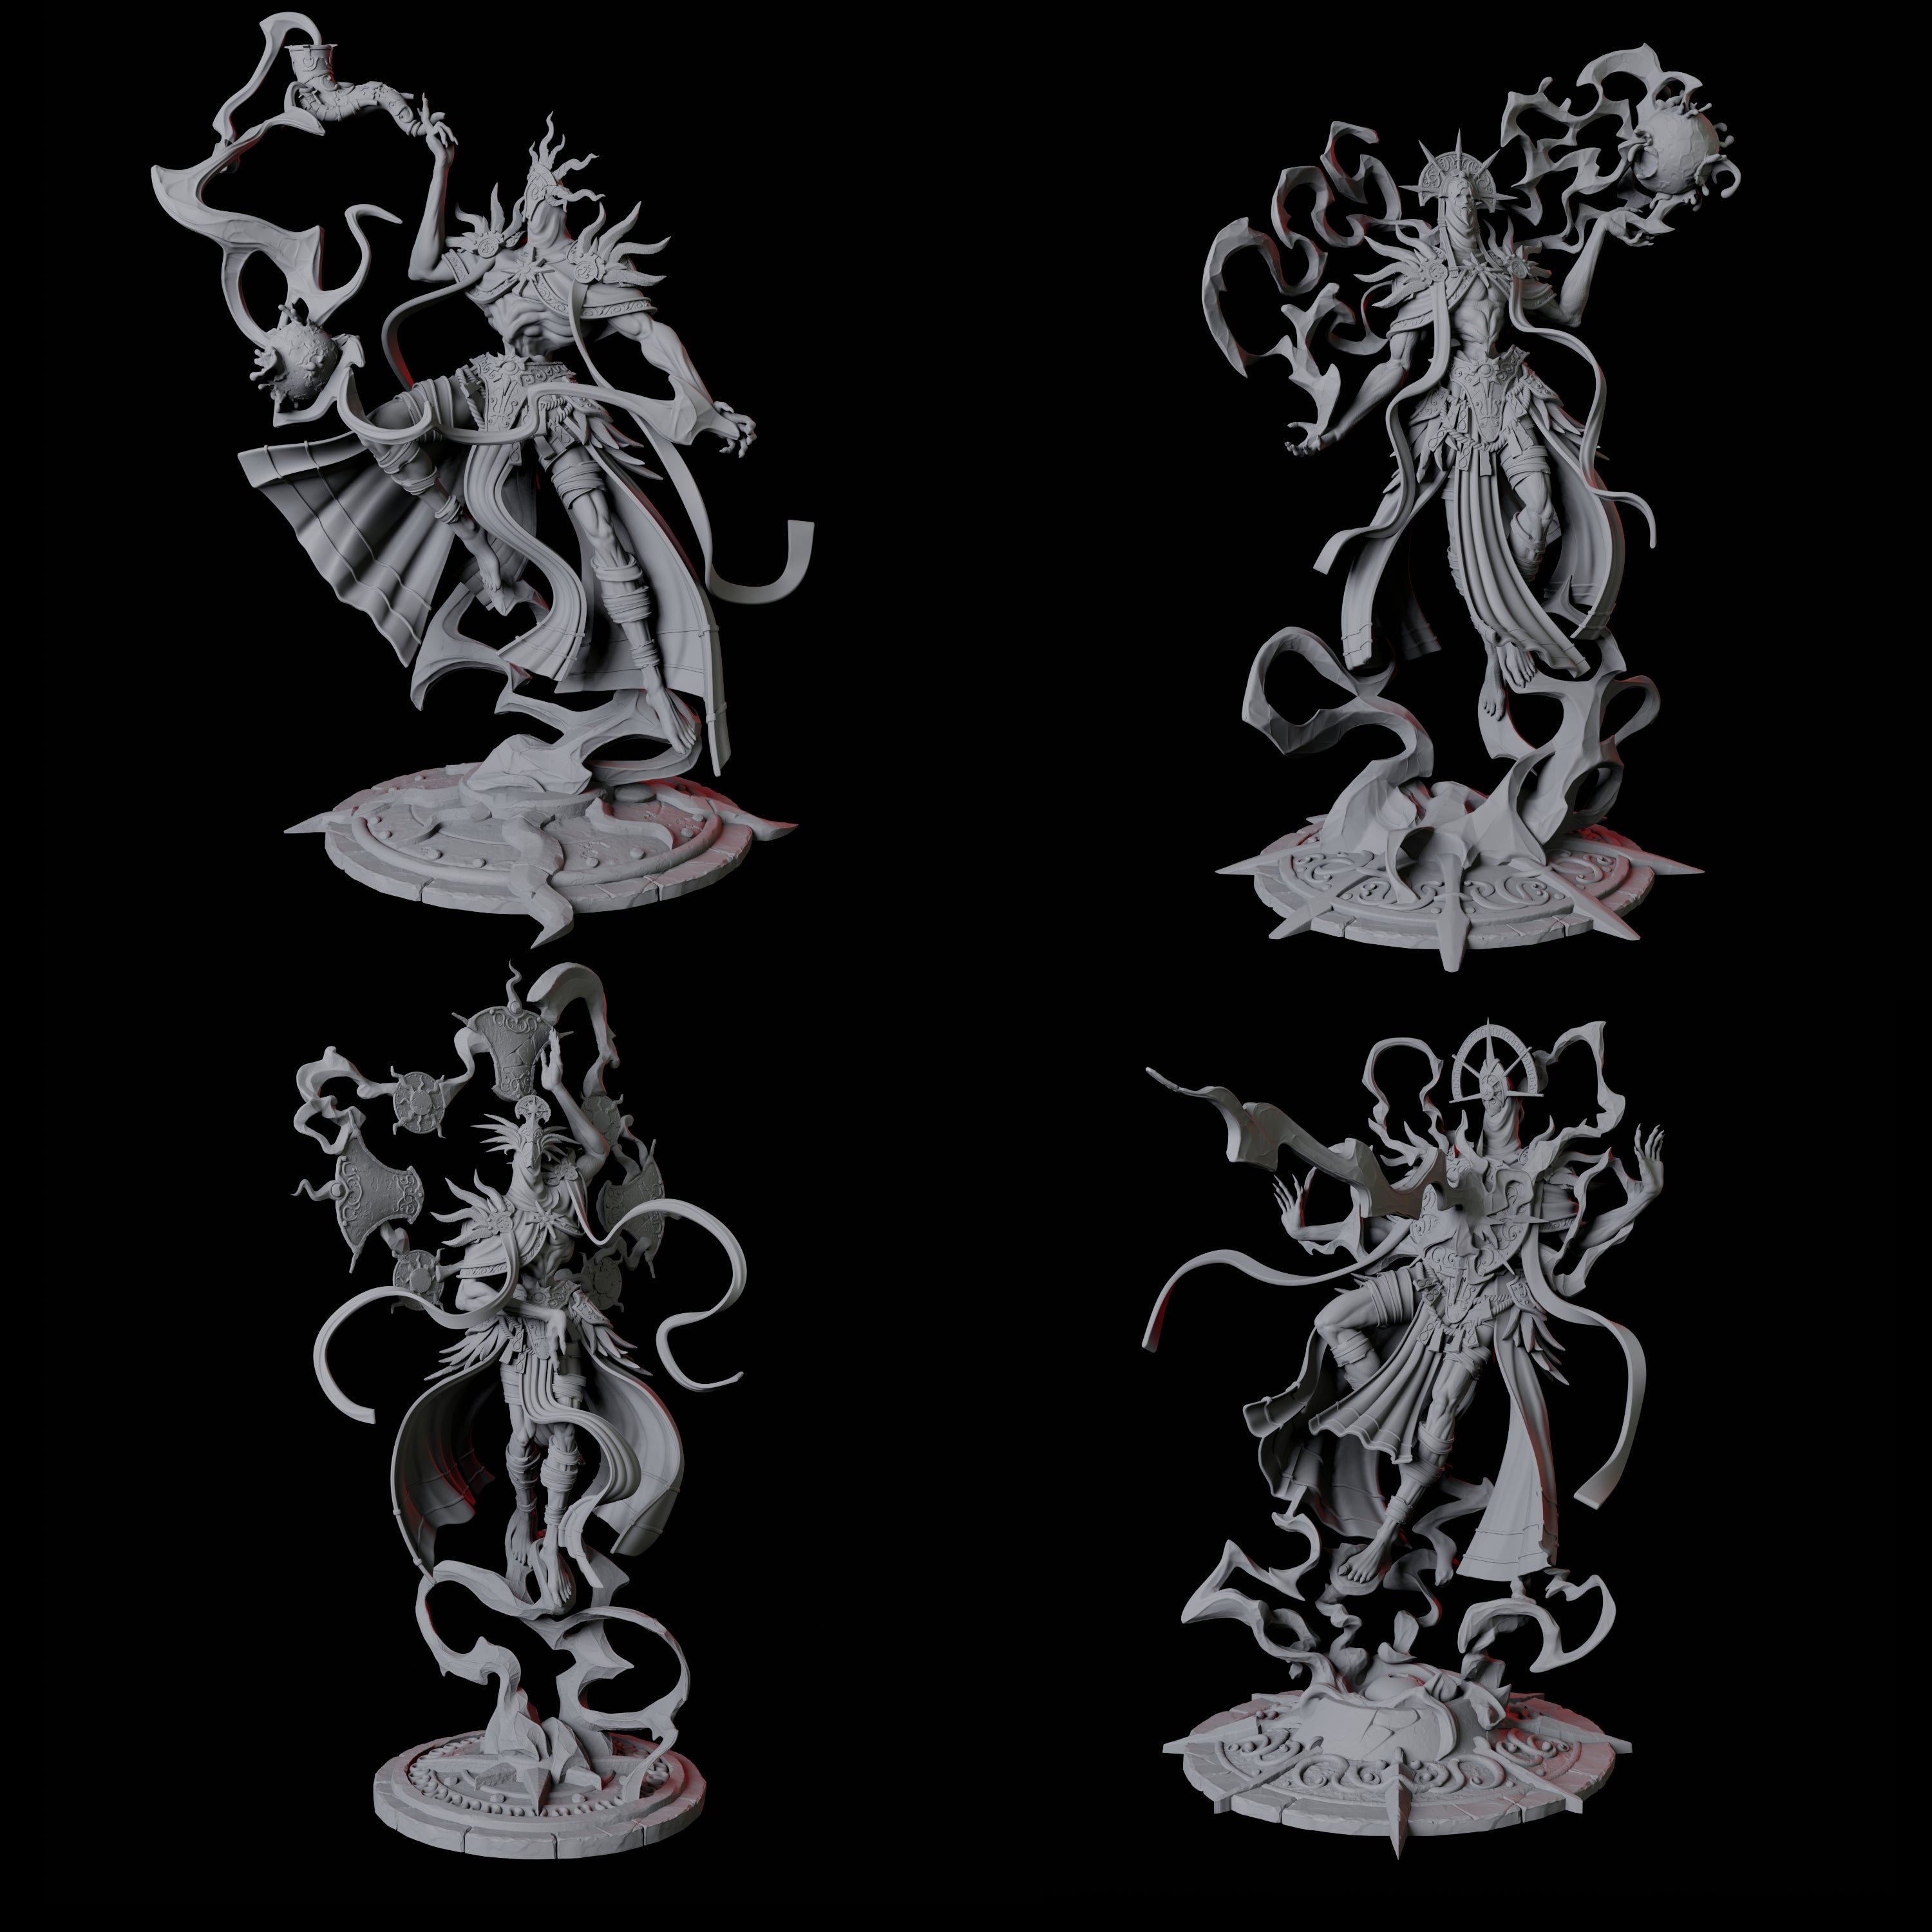 Four Sparking Celestial Mages Miniature for Dungeons and Dragons, Pathfinder or other TTRPGs